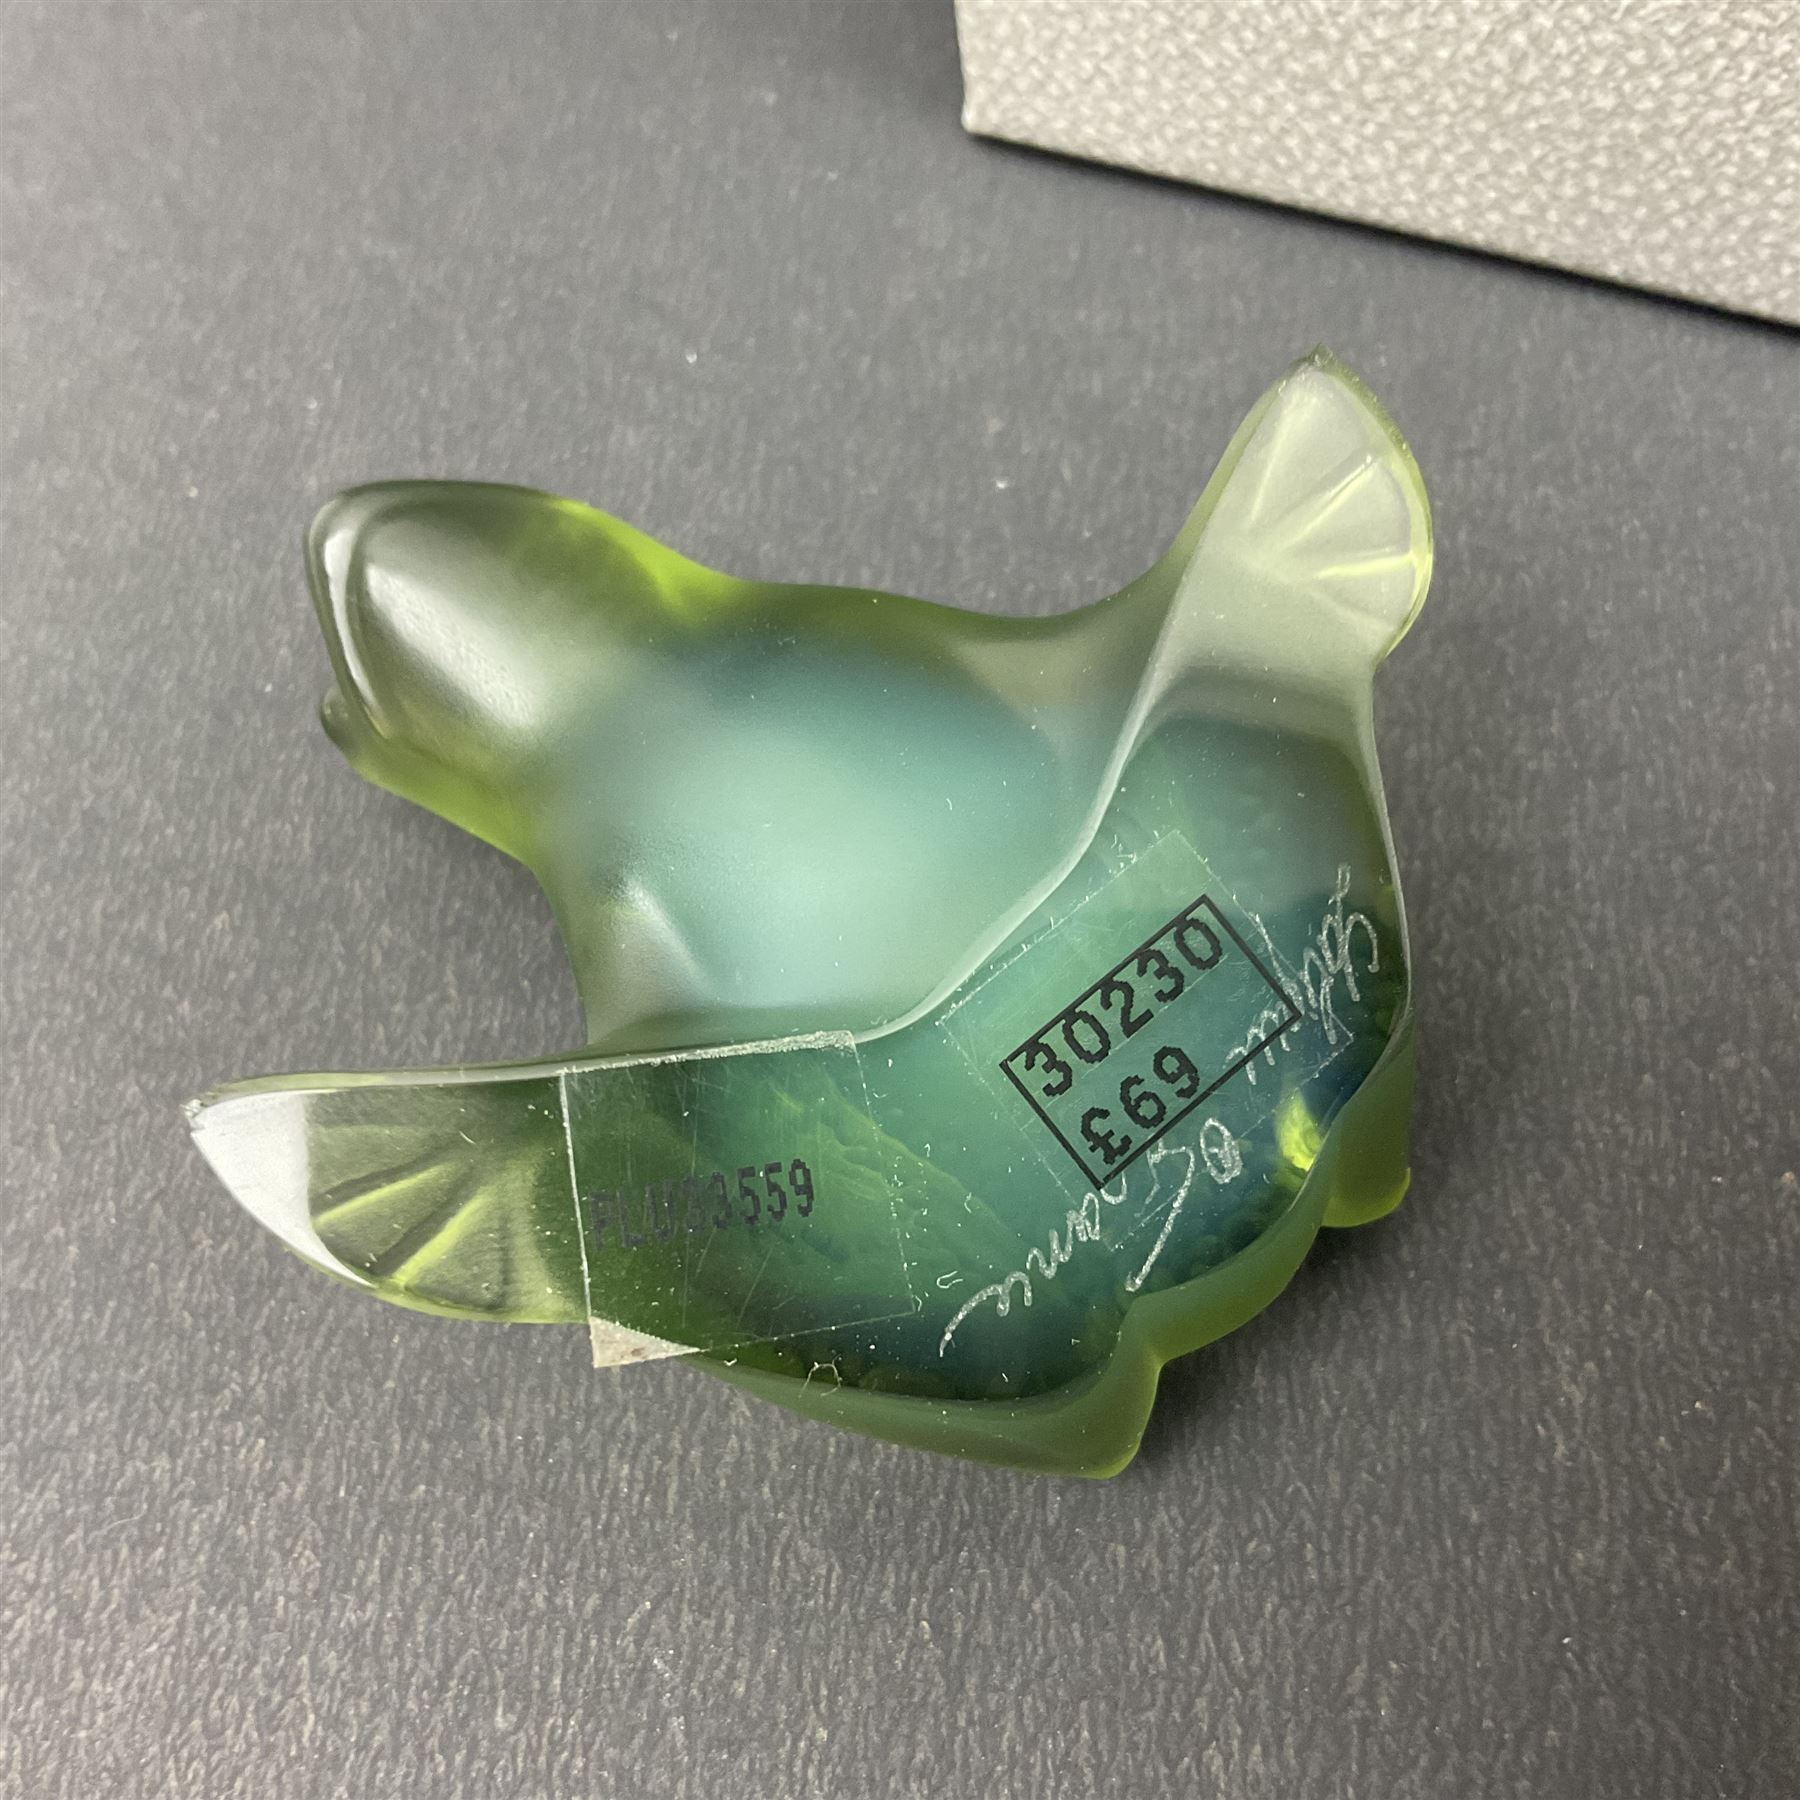 Lalique small green glass frog - Image 4 of 8